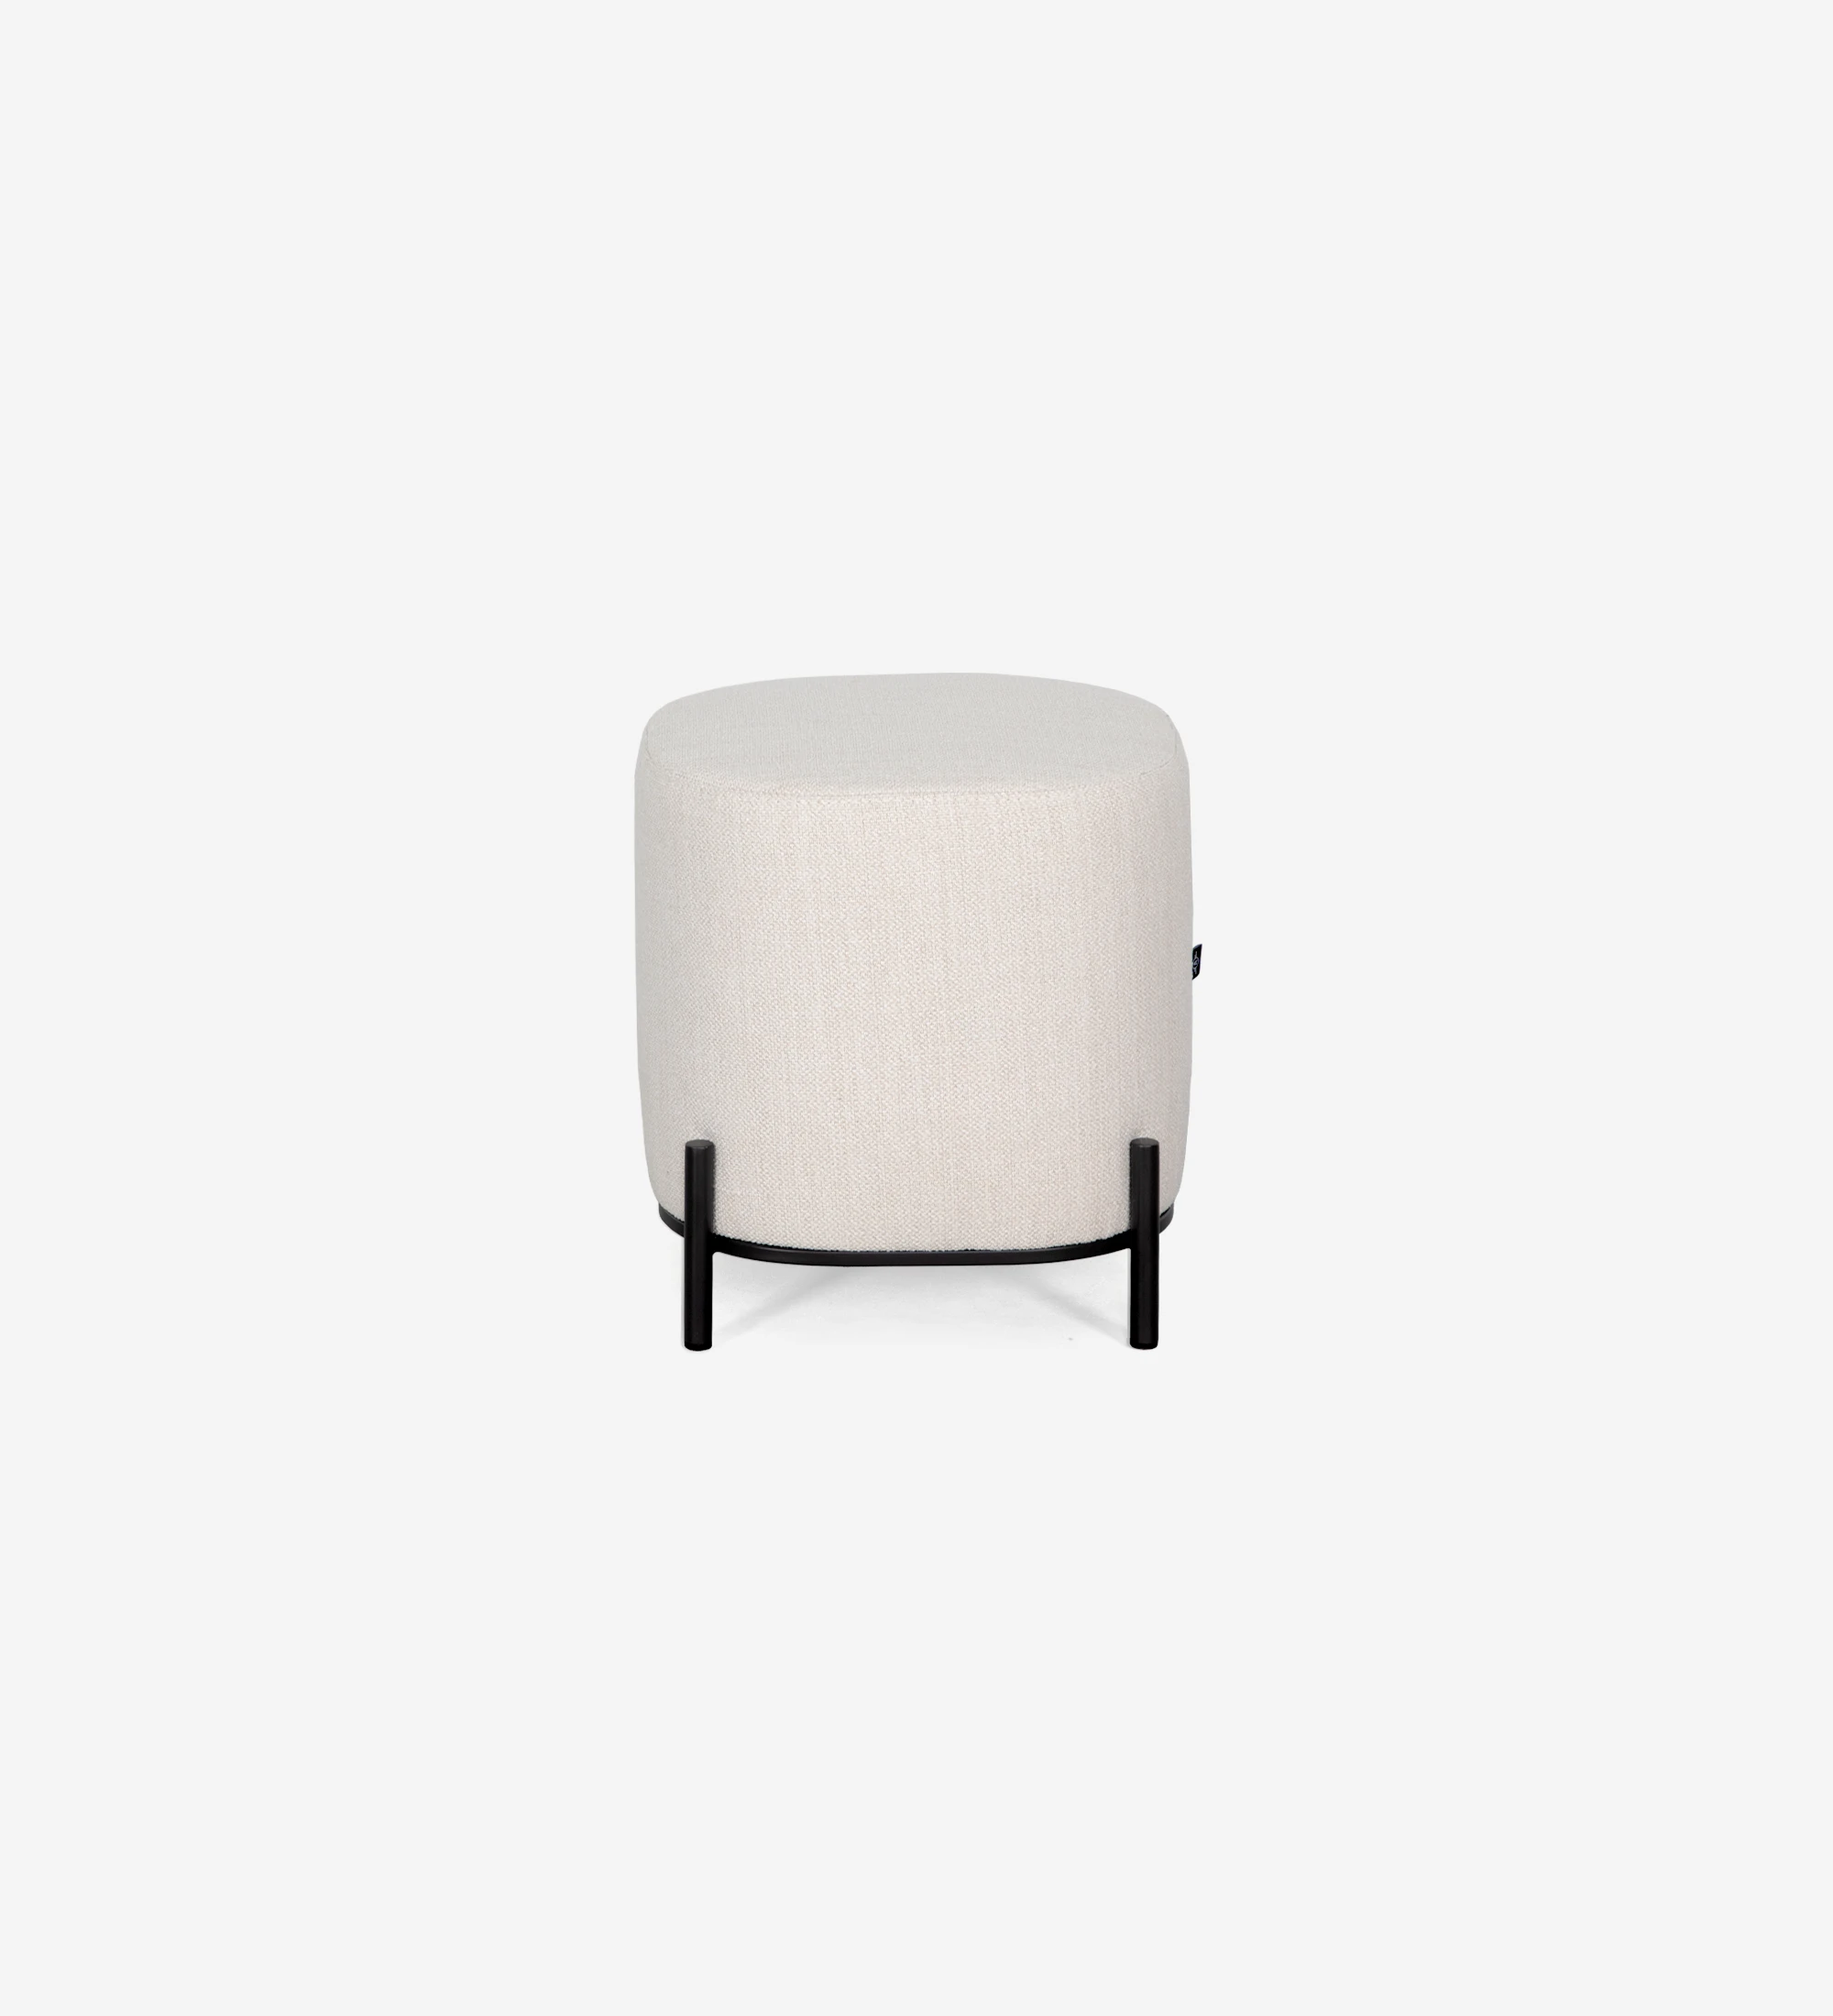 Cannes square puff, upholstered in pearl fabric, black lacquered metal feet, 38 x 38 cm.